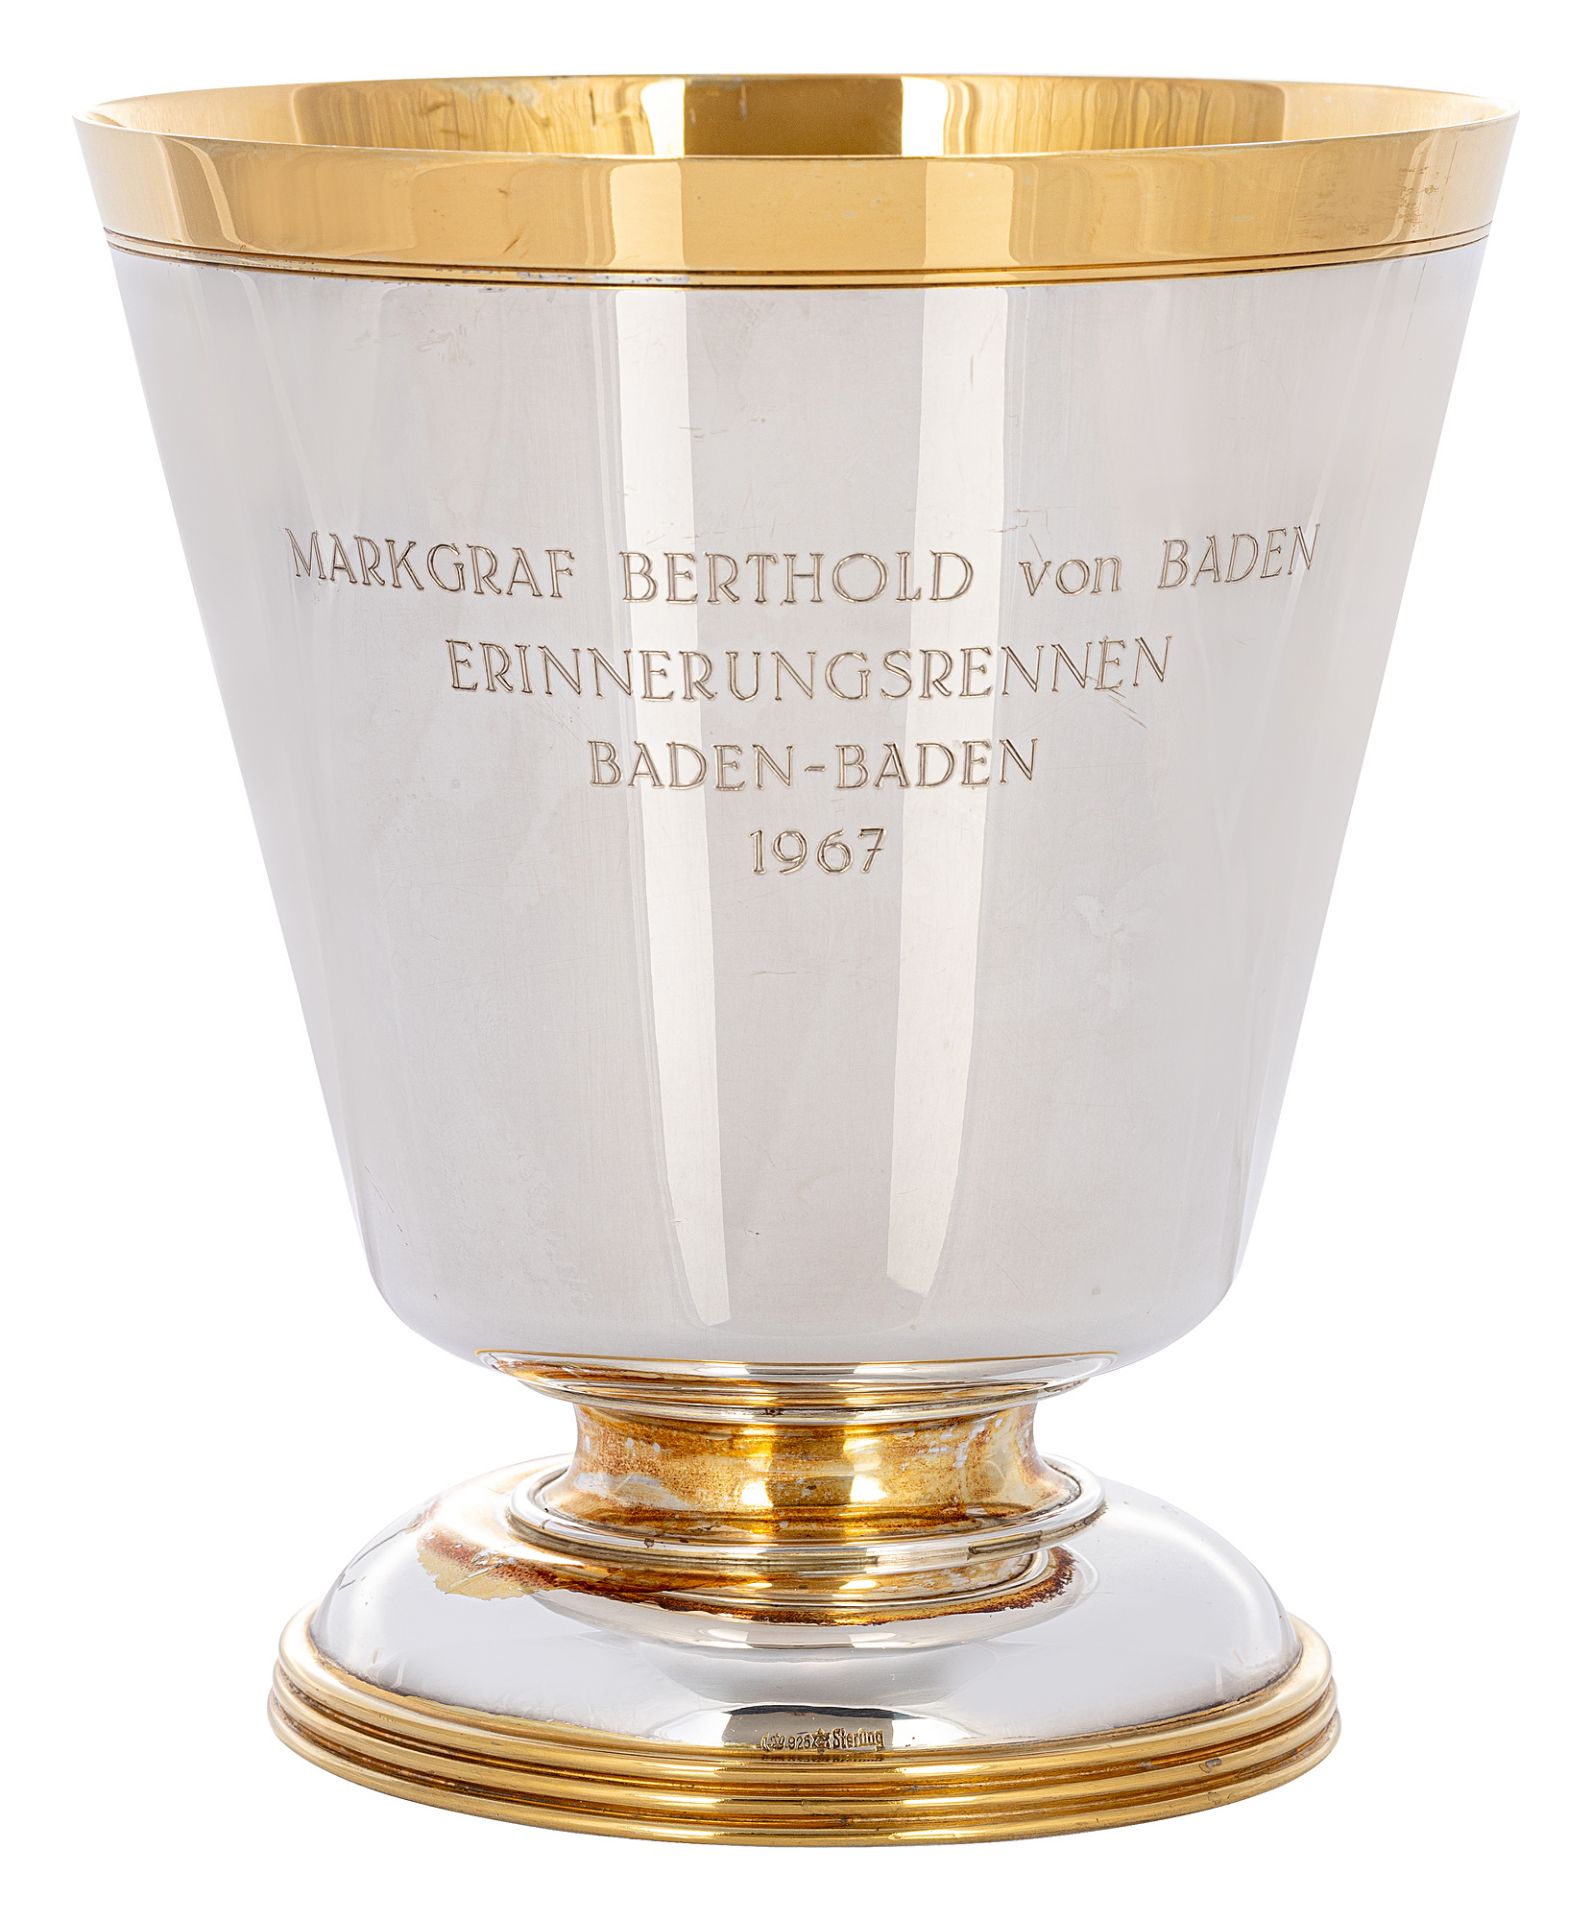 Margravial horse racing cup from Baden-Baden - Image 2 of 3